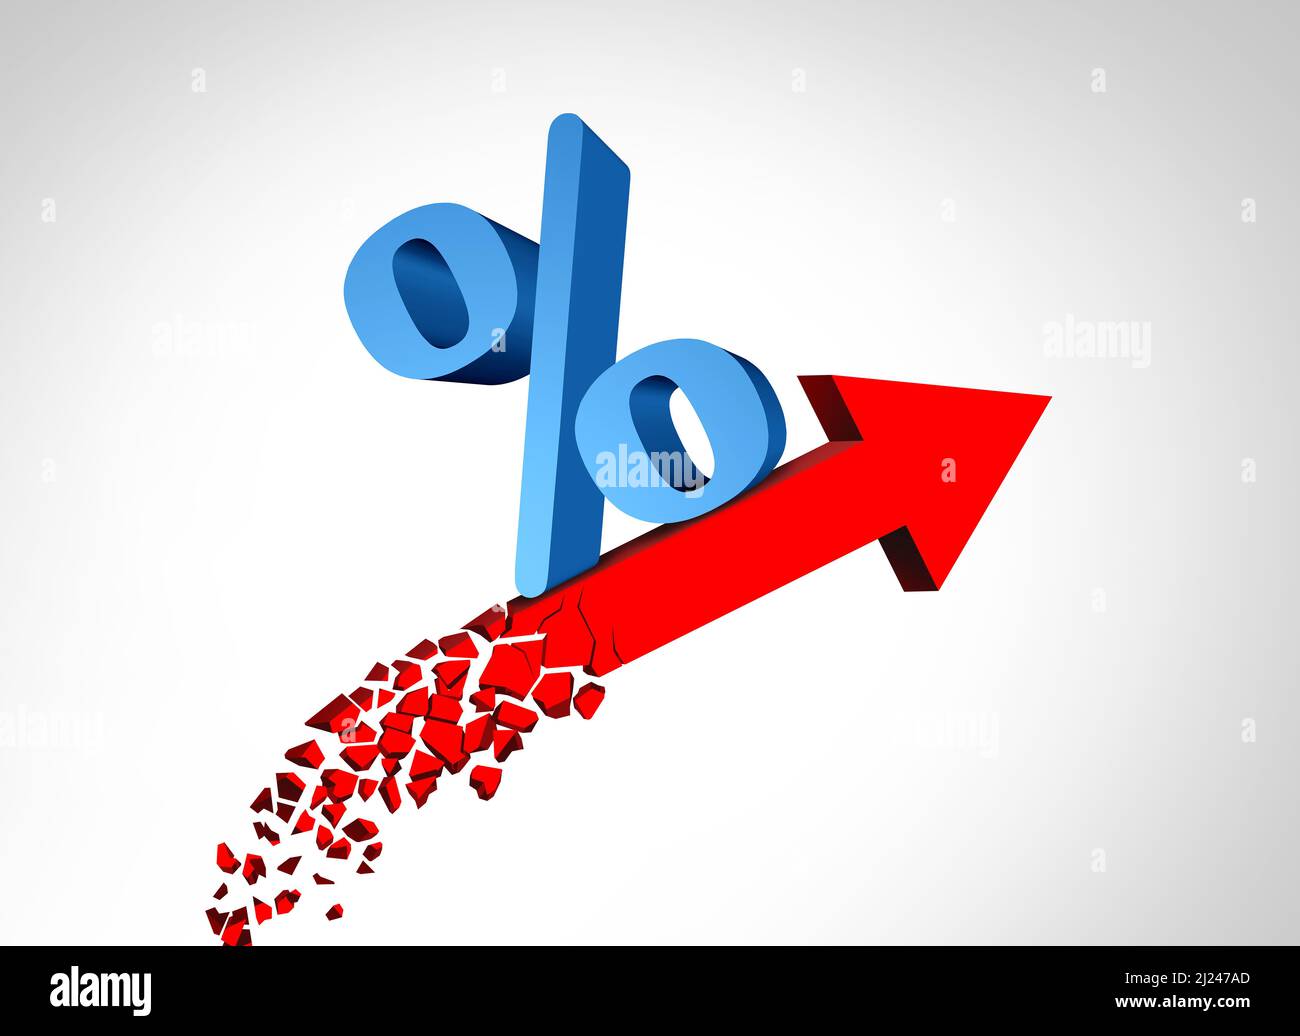 Rise Of Interest rates and higher rate or rising financing cost as an inflation or recession economic concept with a percentage icon. Stock Photo